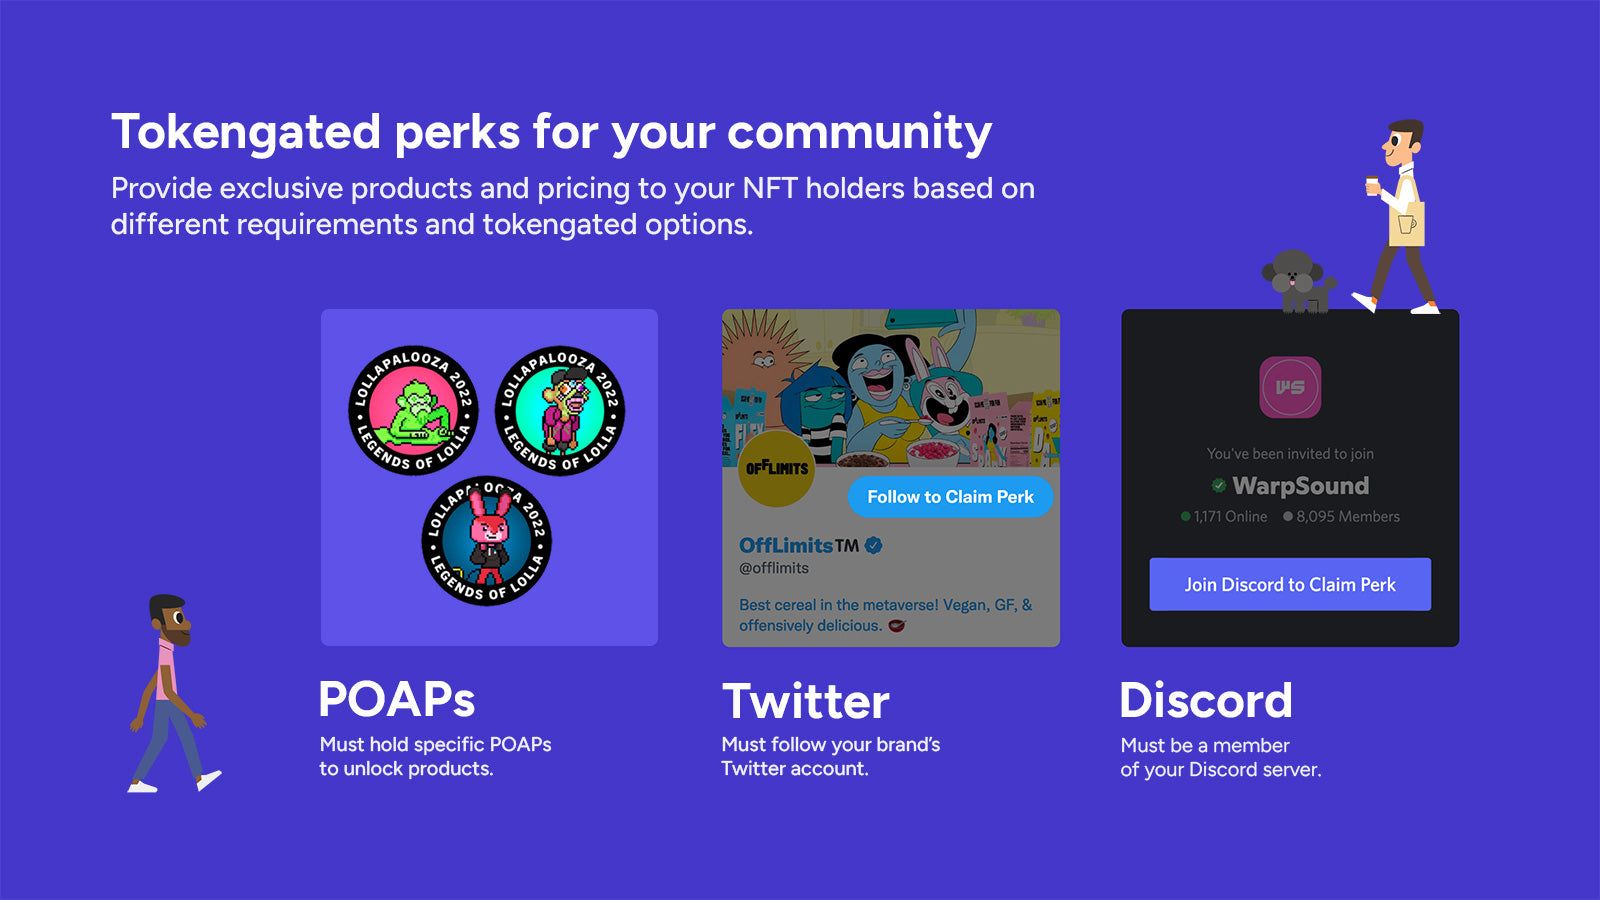 Tokengate perks based on POAPs, Twitter and Discord memberships.